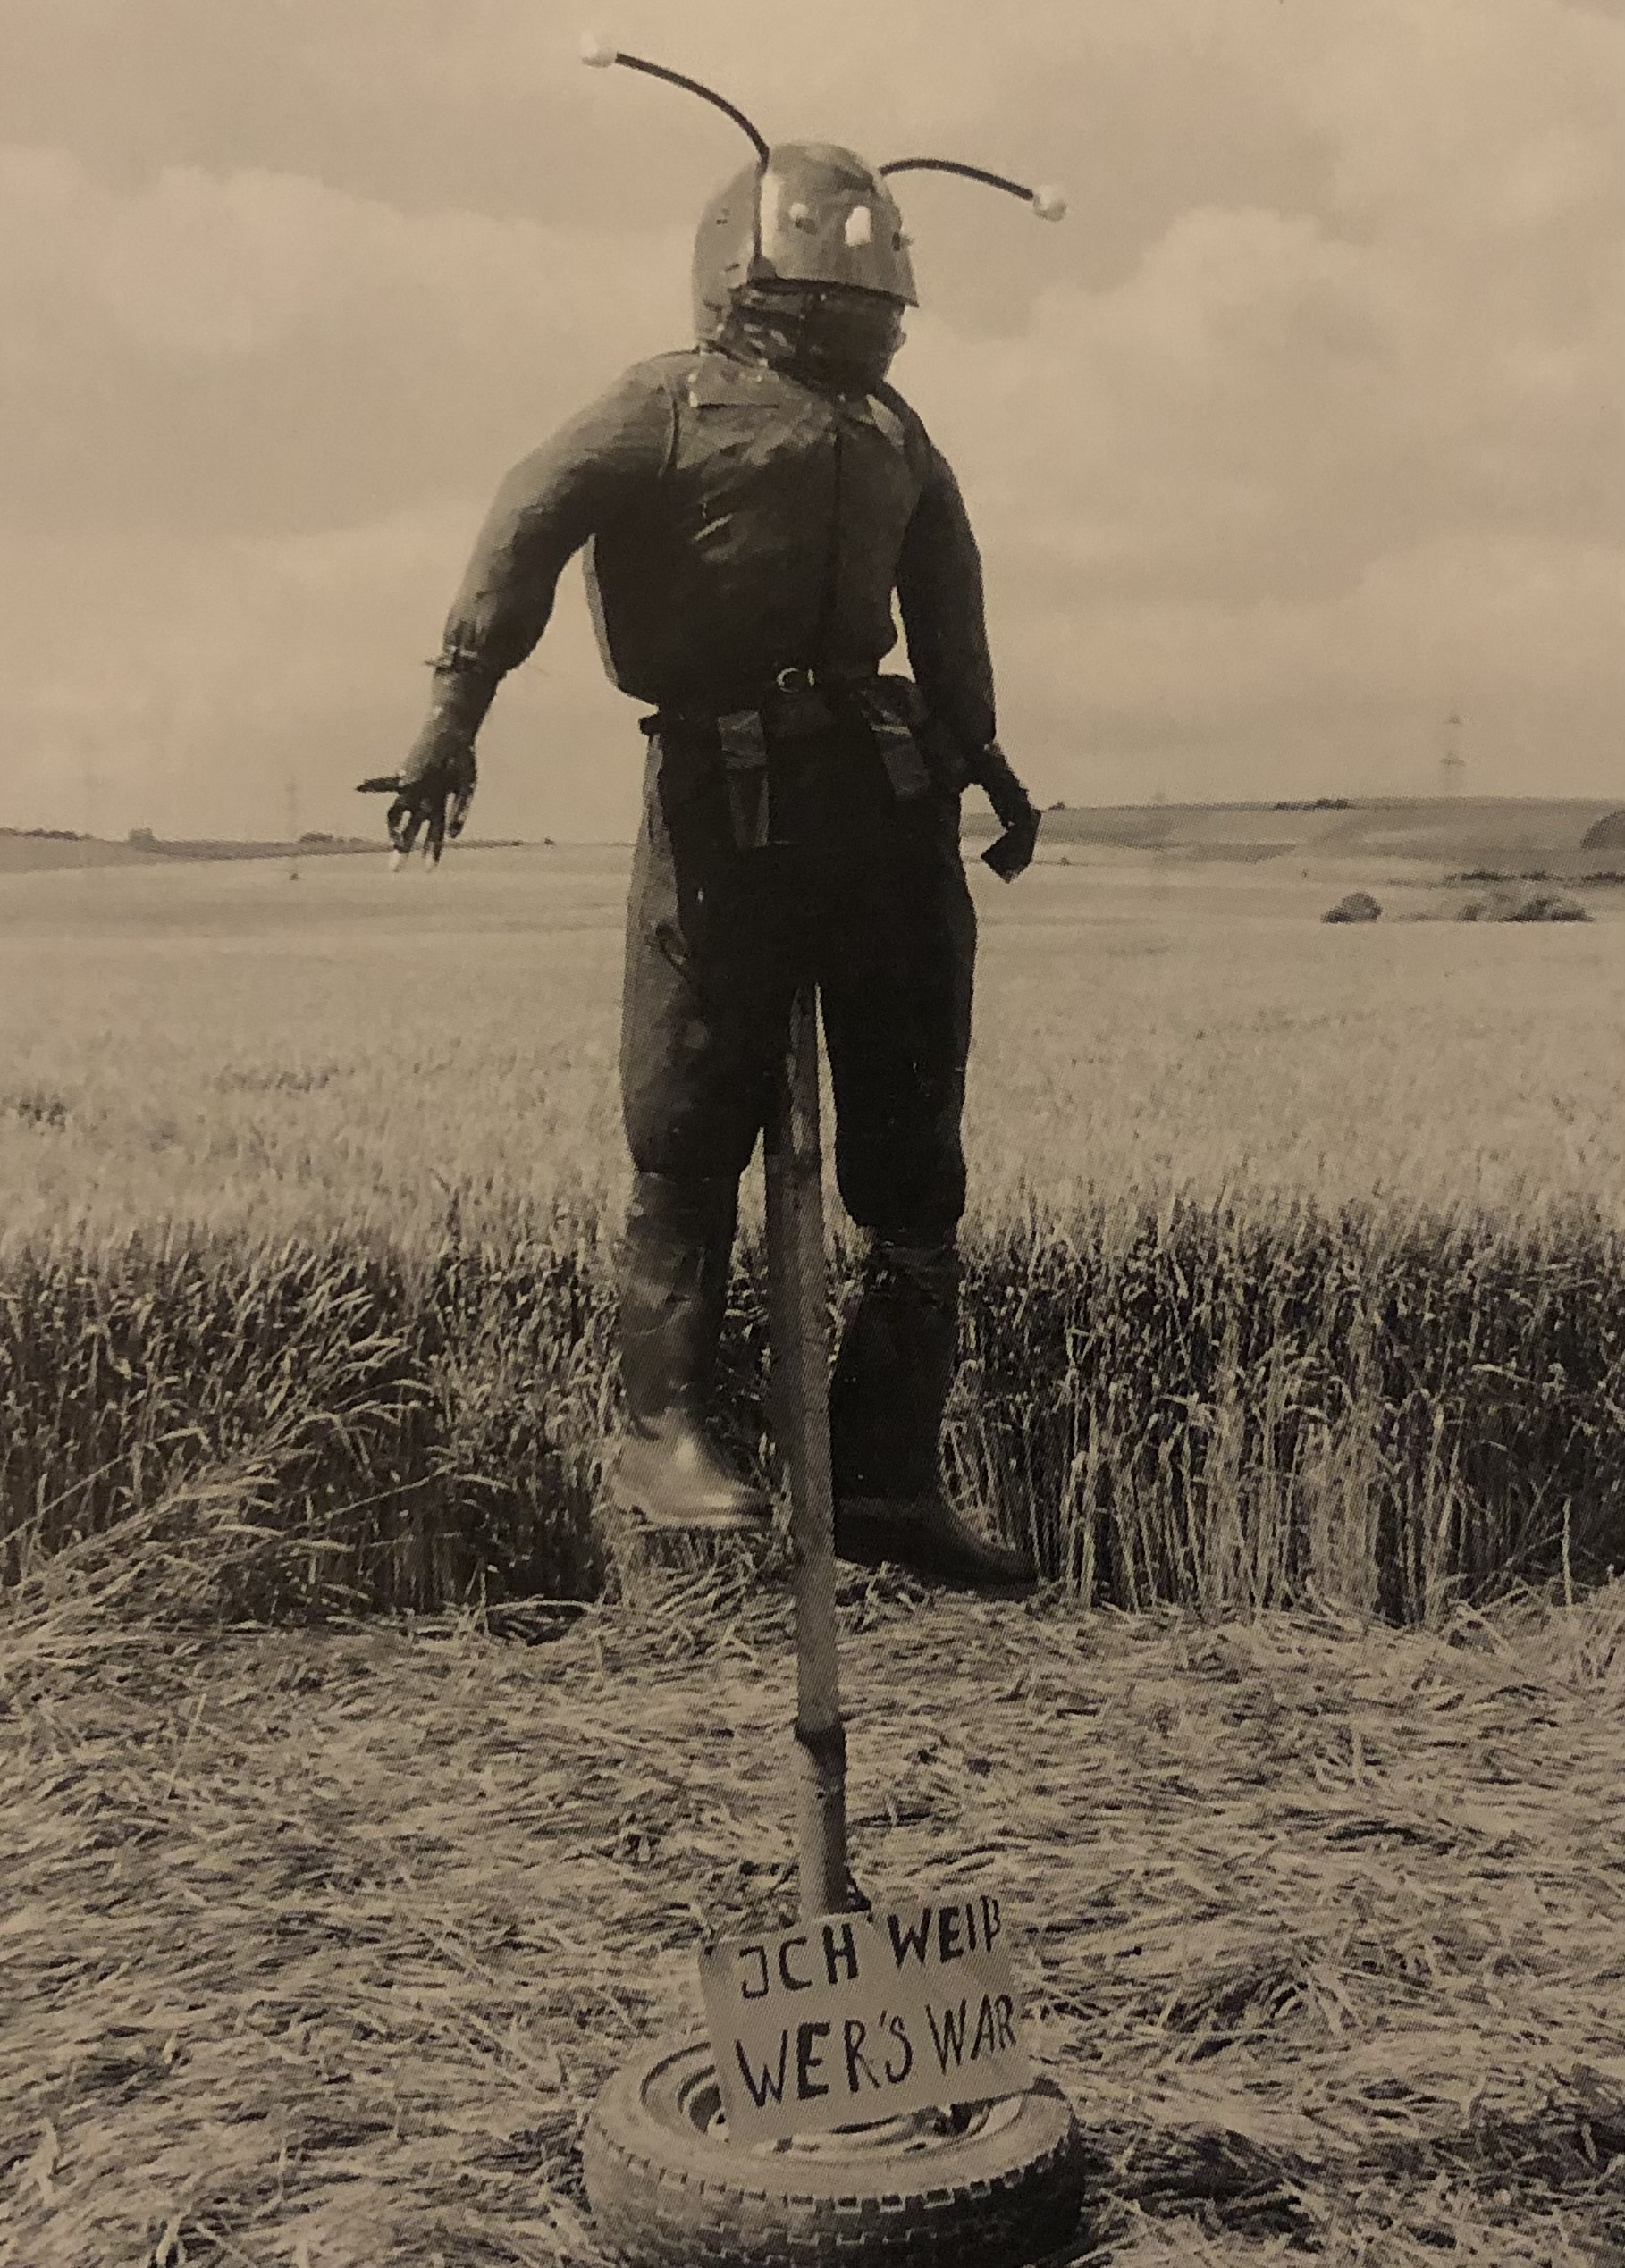 A sepia photograph of a scarecrow dressed as an alien is positioned standing, held up by a wooden pole sticking out of a tire sitting in a flattened part of a wheat field in the foreground with a line of upright wheat behind it and the field in the background. The horizon line cuts horizontally ⅔ of the way up the frame with small hills and power lines visible. The top half of the alien figure looms in the sky with gnarled glove hands and a head made of a helmet with eyes and a nose glued on and 2 antennae with small balls at the end sticking out of the top. A hand painted sign sits atop the tire at the bottom of the wooden stake, reading 'ICH WEIß, WER’S WAR'.